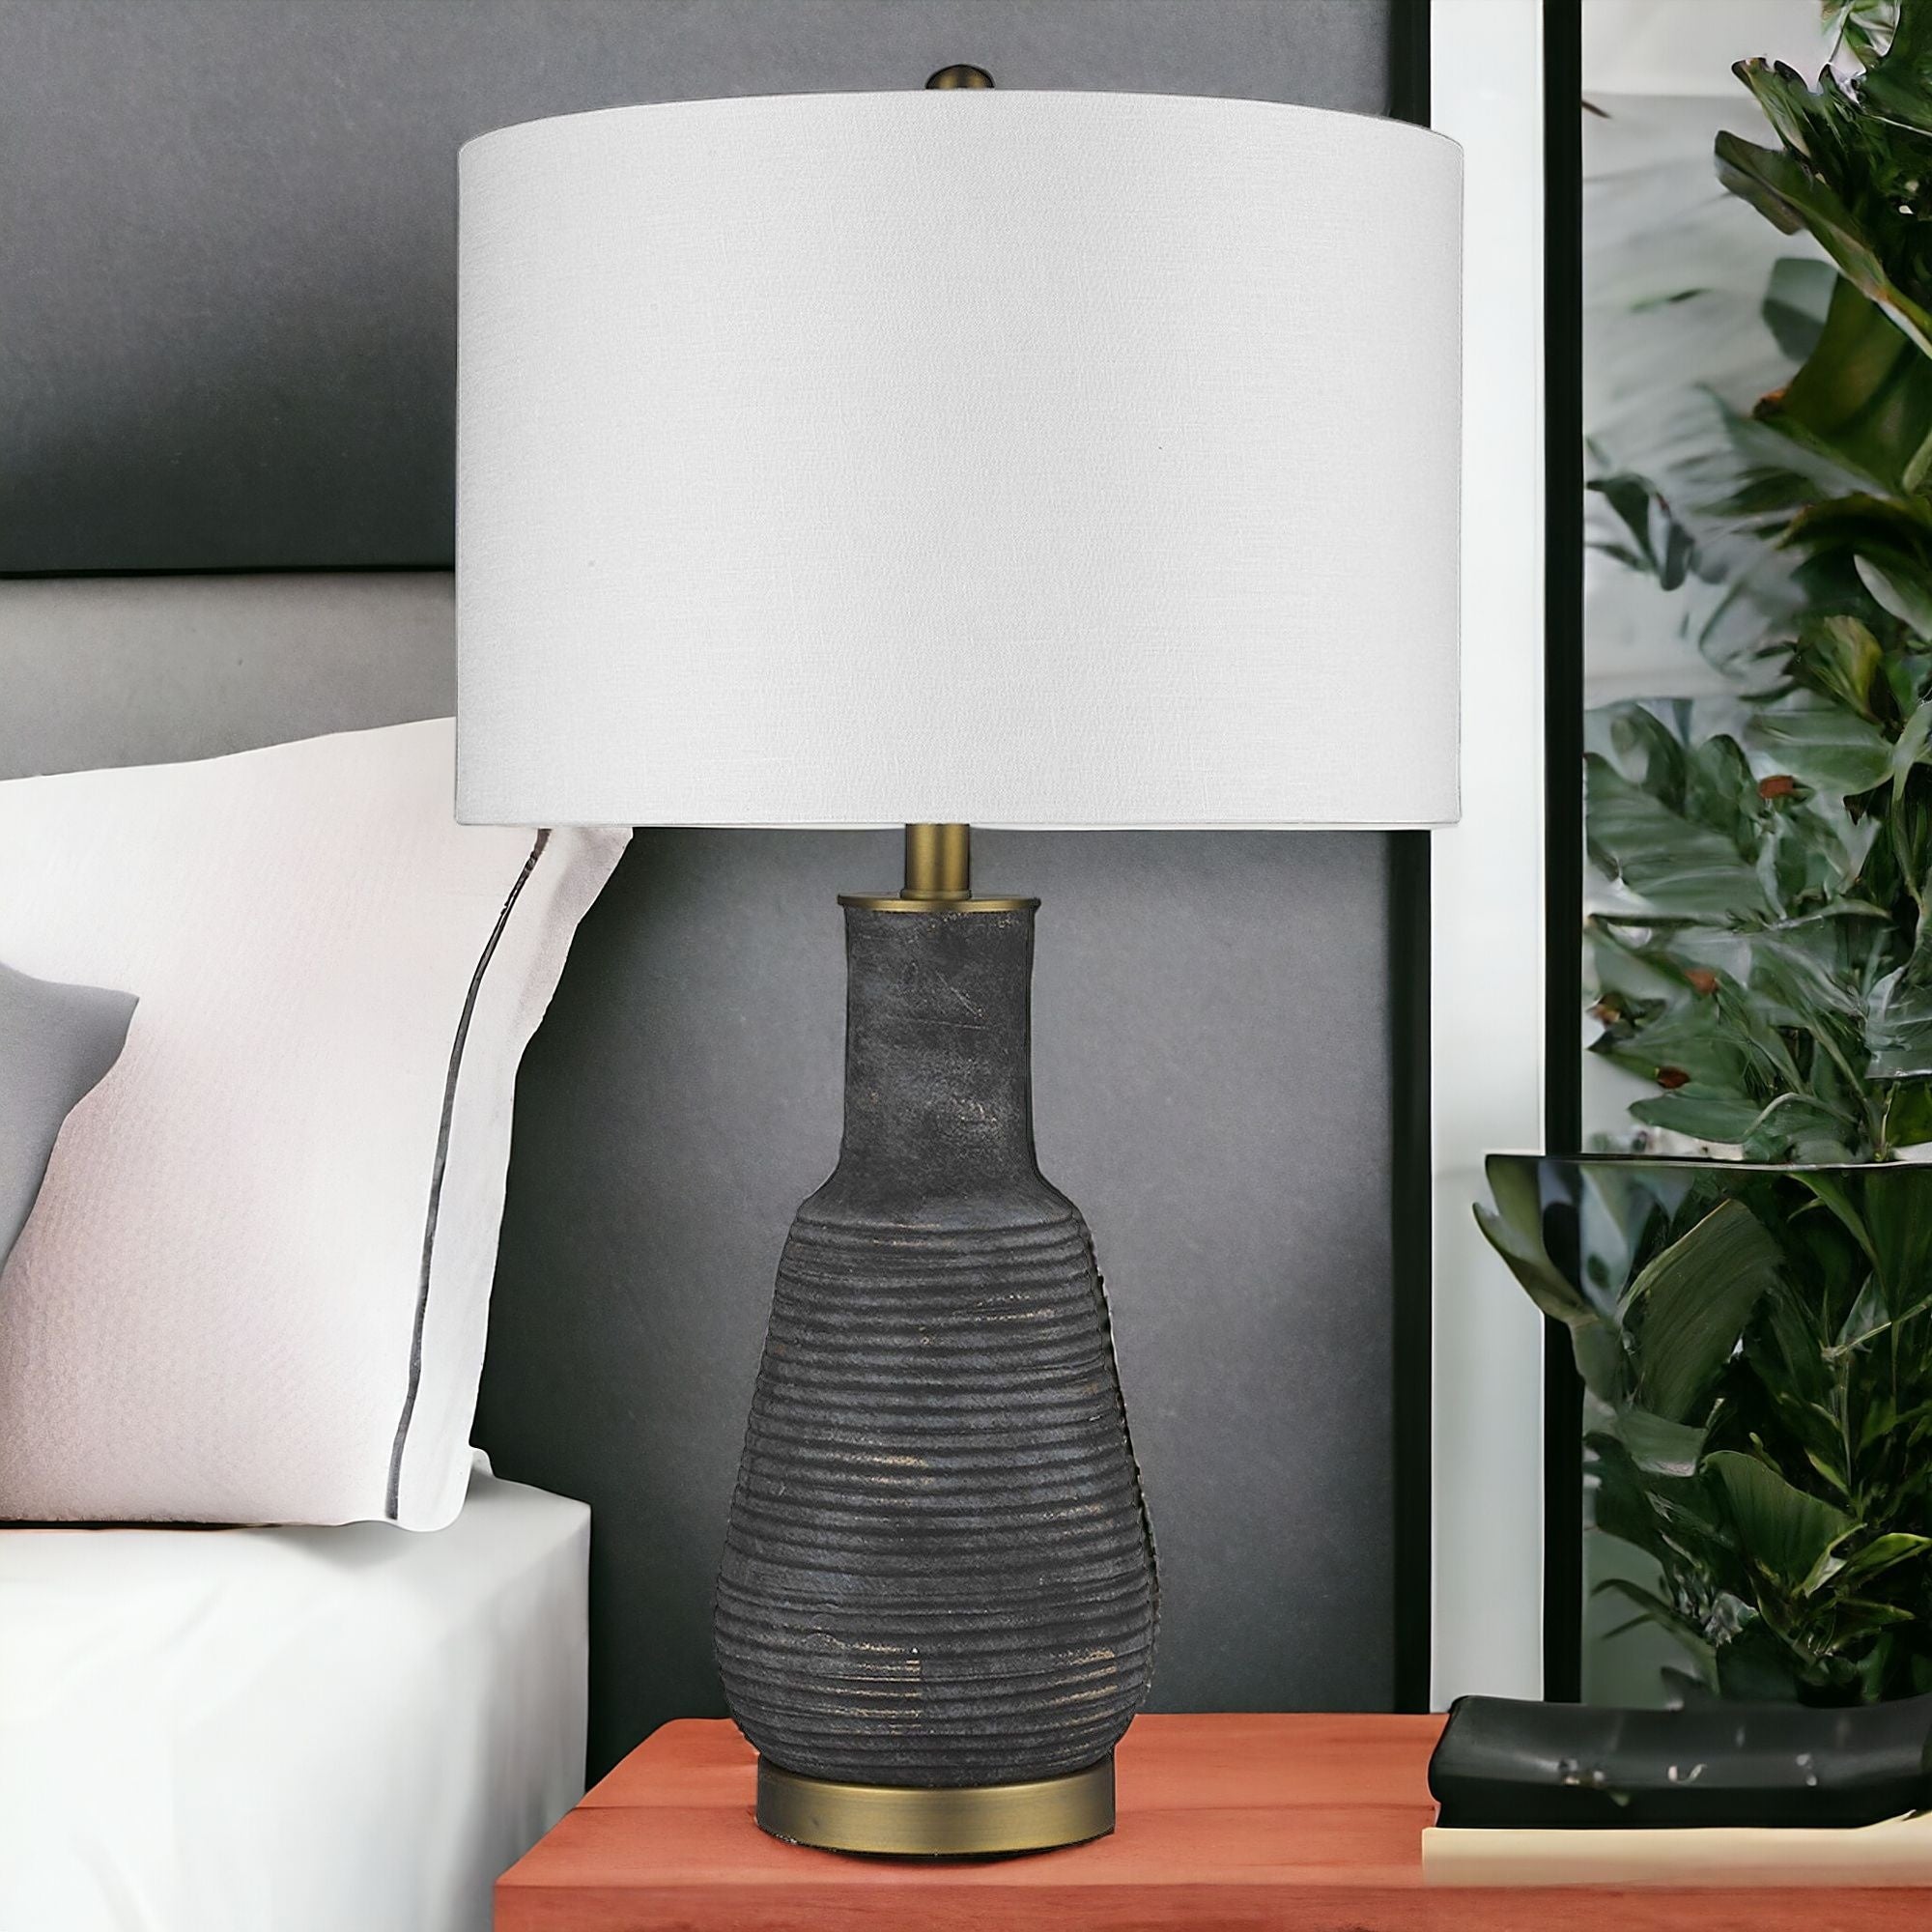 26" Black and Gold Metal Column Table Lamp With White Drum Shade